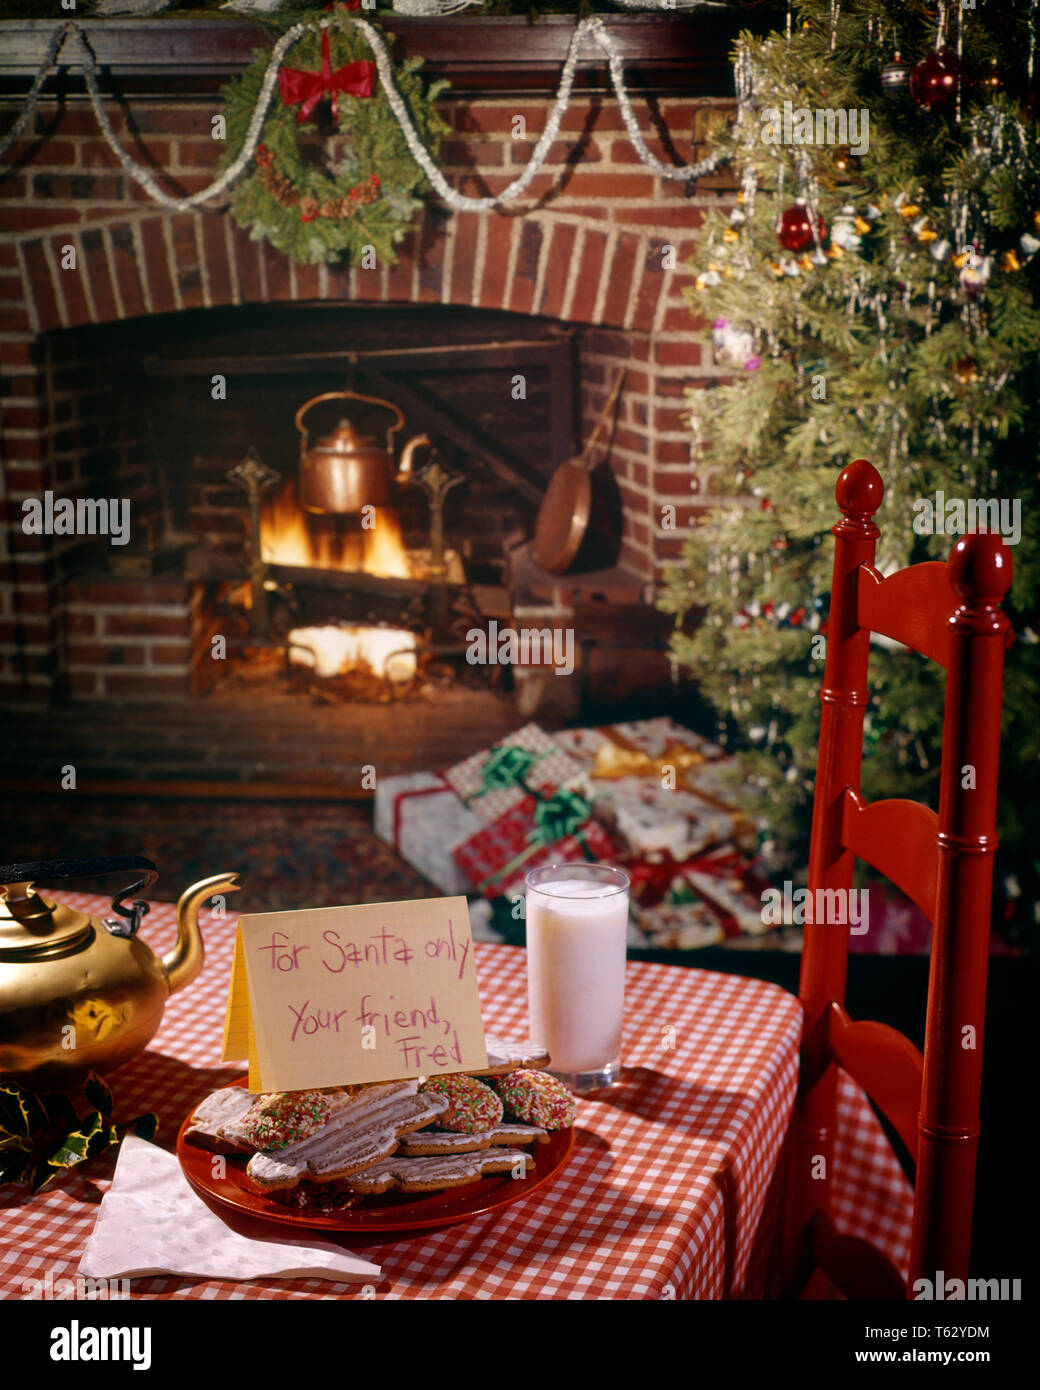 1960s 1970s CHRISTMAS FIREPLACE & TREE TABLE WITH COOKIES GLASS OF MILK AND NOTE FOR SANTA  - kx5980 HAR001 HARS COOPERATION FATHER CHRISTMAS JOLLY JOYOUS NICHOLAS HAR001 OLD FASHIONED Stock Photo